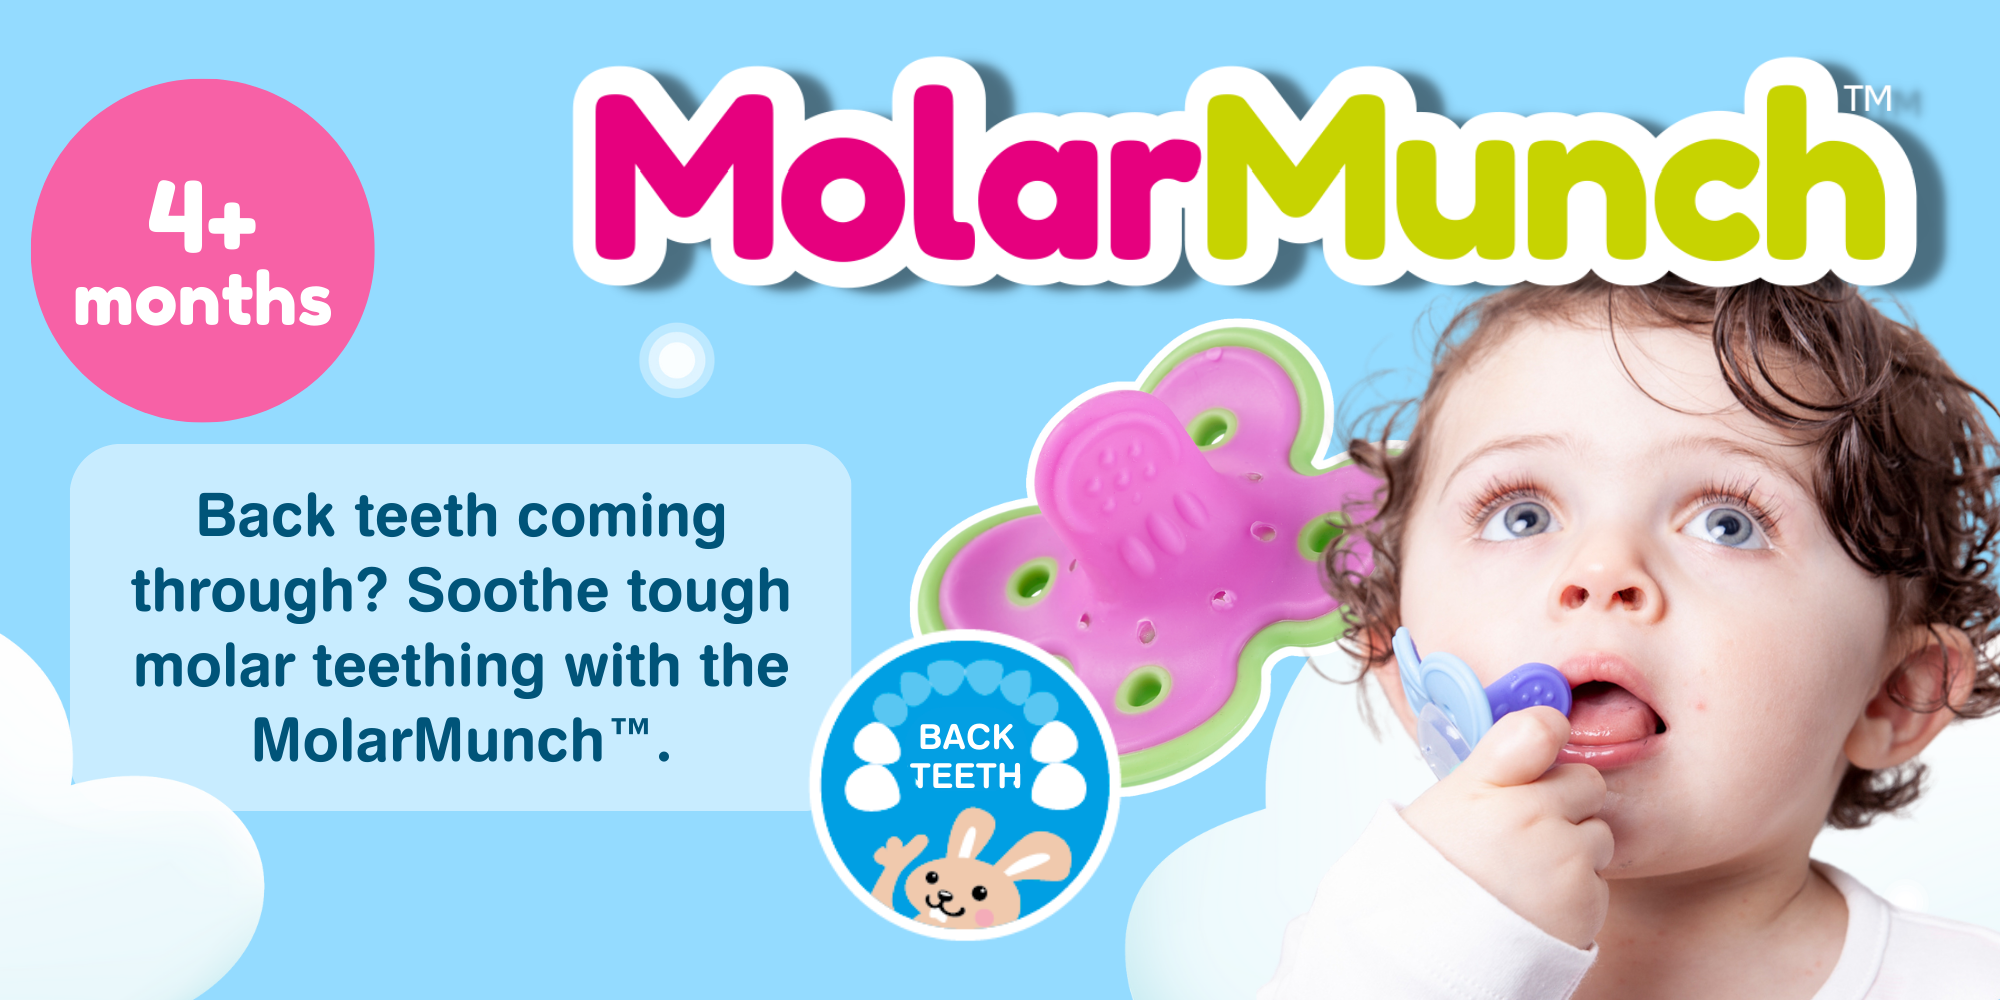 molar_munch_baby_teether_teething_toodler_remedies_dummy weaning